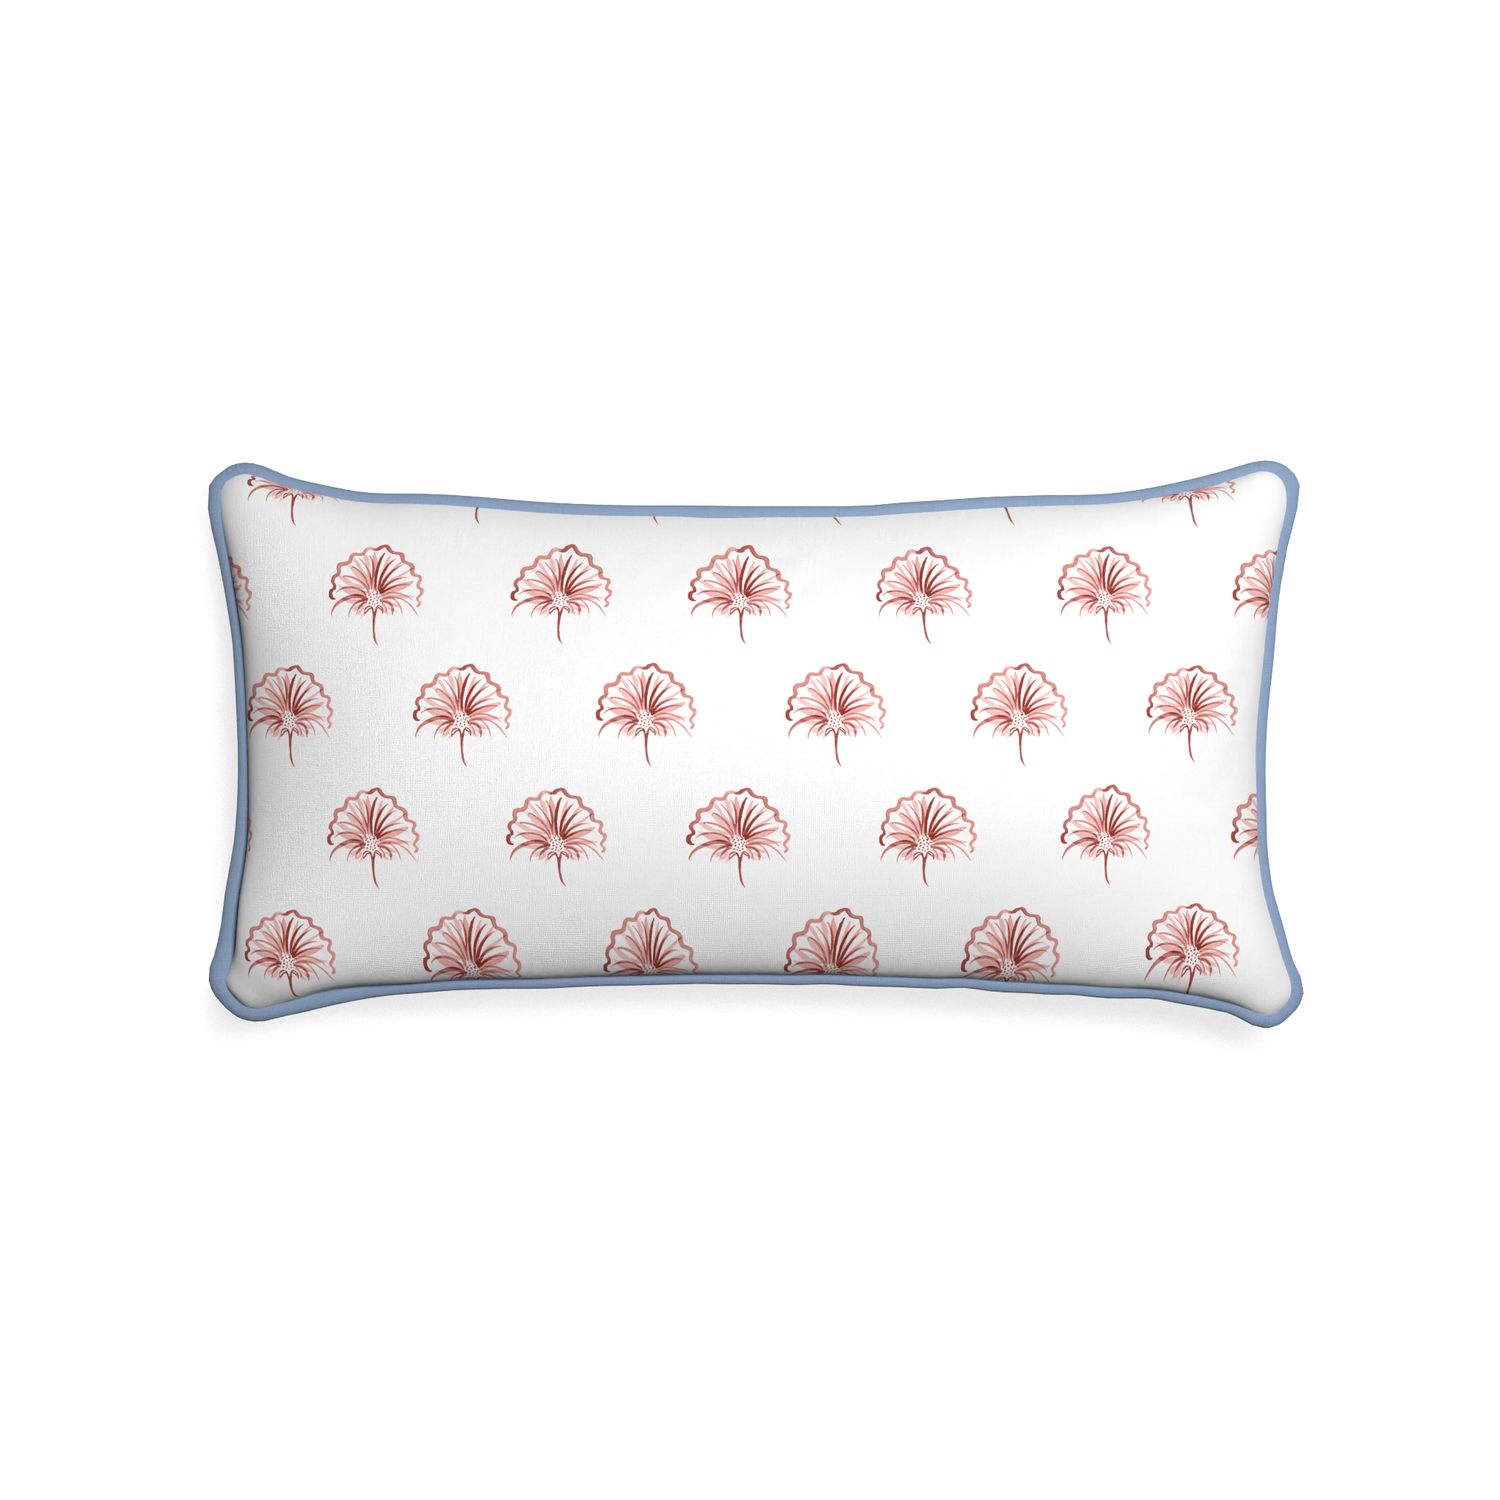 Midi-lumbar penelope rose custom floral pinkpillow with sky piping on white background